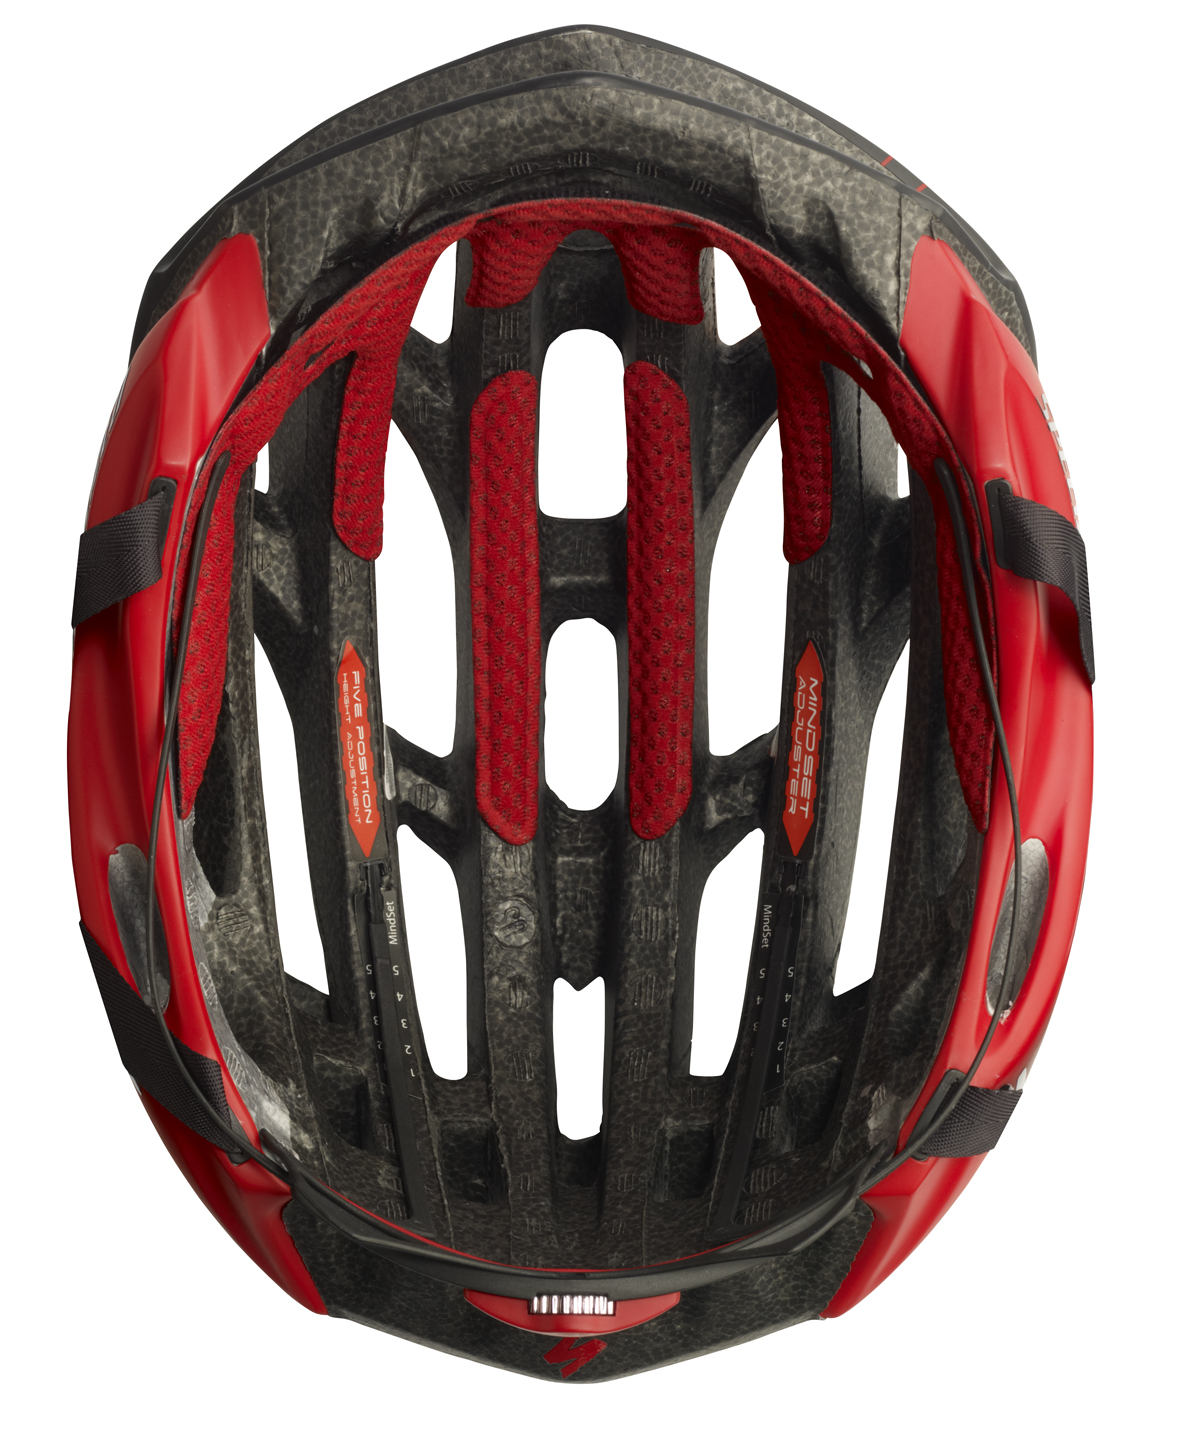 Specialized S-Works Prevail World Cup 2015 - kit adesivi casco